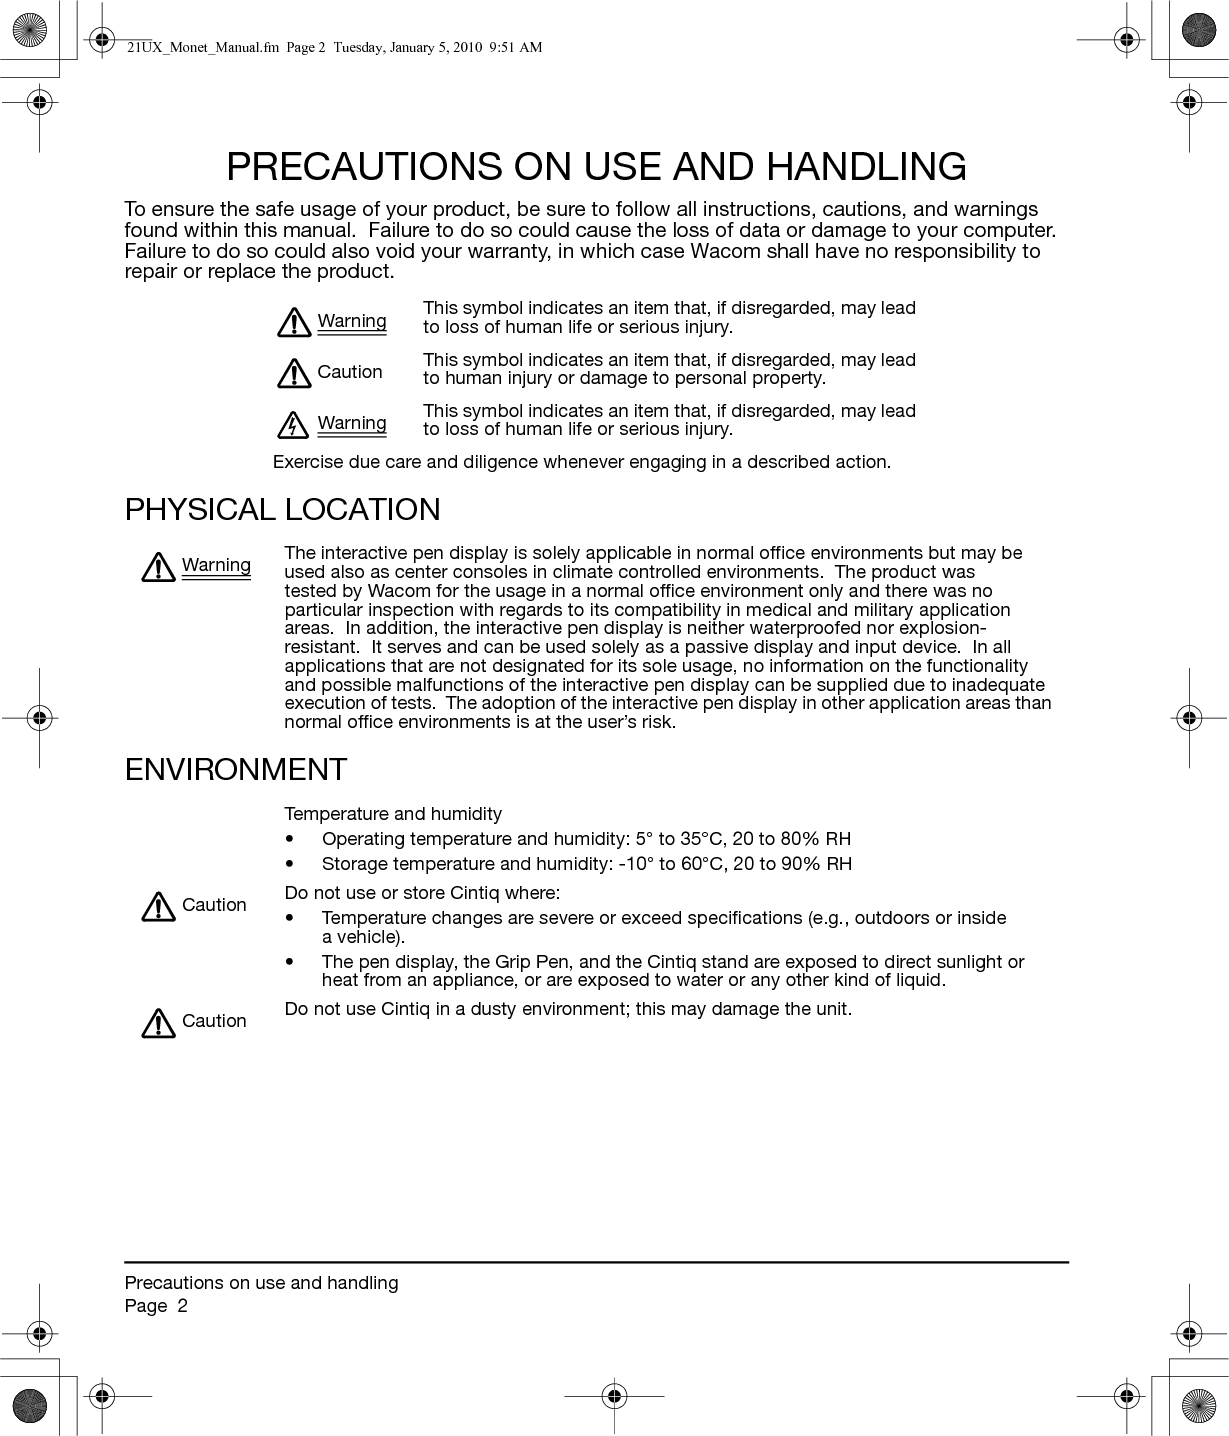 Precautions on use and handlingPage  2PRECAUTIONS ON USE AND HANDLINGTo ensure the safe usage of your product, be sure to follow all instructions, cautions, and warnings found within this manual.  Failure to do so could cause the loss of data or damage to your computer.  Failure to do so could also void your warranty, in which case Wacom shall have no responsibility to repair or replace the product.PHYSICAL LOCATIONENVIRONMENT Warning This symbol indicates an item that, if disregarded, may lead to loss of human life or serious injury.Caution This symbol indicates an item that, if disregarded, may lead to human injury or damage to personal property.Warning This symbol indicates an item that, if disregarded, may lead to loss of human life or serious injury.Exercise due care and diligence whenever engaging in a described action.Warning The interactive pen display is solely applicable in normal office environments but may be used also as center consoles in climate controlled environments.  The product was tested by Wacom for the usage in a normal office environment only and there was no particular inspection with regards to its compatibility in medical and military application areas.  In addition, the interactive pen display is neither waterproofed nor explosion-resistant.  It serves and can be used solely as a passive display and input device.  In all applications that are not designated for its sole usage, no information on the functionality and possible malfunctions of the interactive pen display can be supplied due to inadequate execution of tests.  The adoption of the interactive pen display in other application areas than normal office environments is at the user’s risk.Temperature and humidity• Operating temperature and humidity: 5° to 35°C, 20 to 80% RH• Storage temperature and humidity: -10° to 60°C, 20 to 90% RHCaution Do not use or store Cintiq where:• Temperature changes are severe or exceed specifications (e.g., outdoors or inside a vehicle).• The pen display, the Grip Pen, and the Cintiq stand are exposed to direct sunlight or heat from an appliance, or are exposed to water or any other kind of liquid.Caution Do not use Cintiq in a dusty environment; this may damage the unit.21UX_Monet_Manual.fm  Page 2  Tuesday, January 5, 2010  9:51 AM